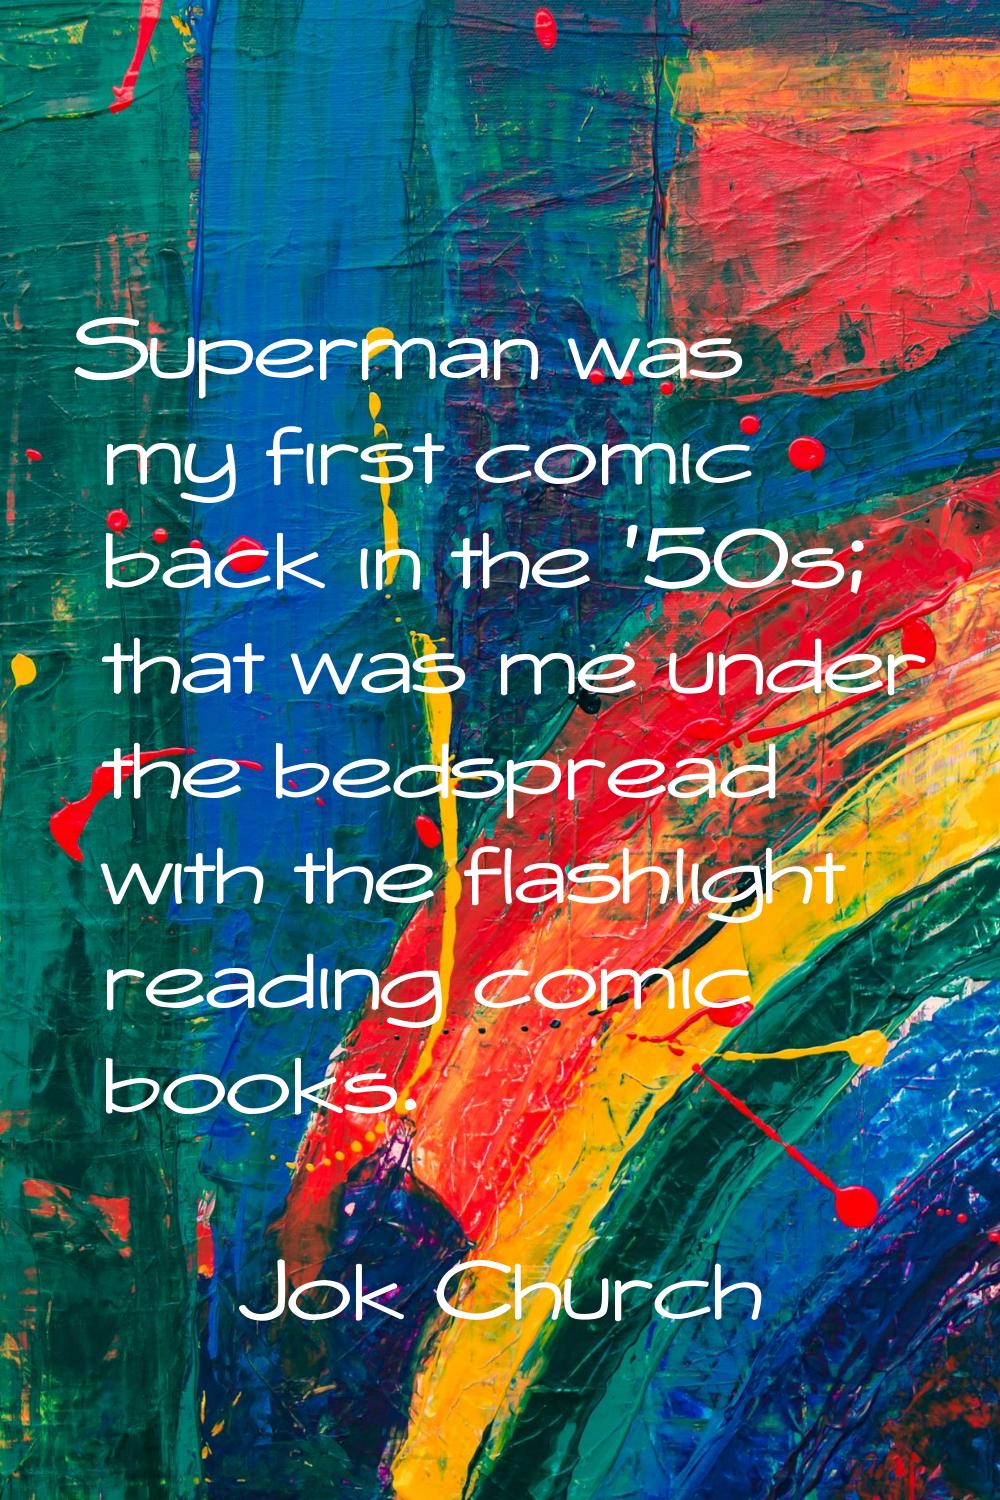 Superman was my first comic back in the '50s; that was me under the bedspread with the flashlight r